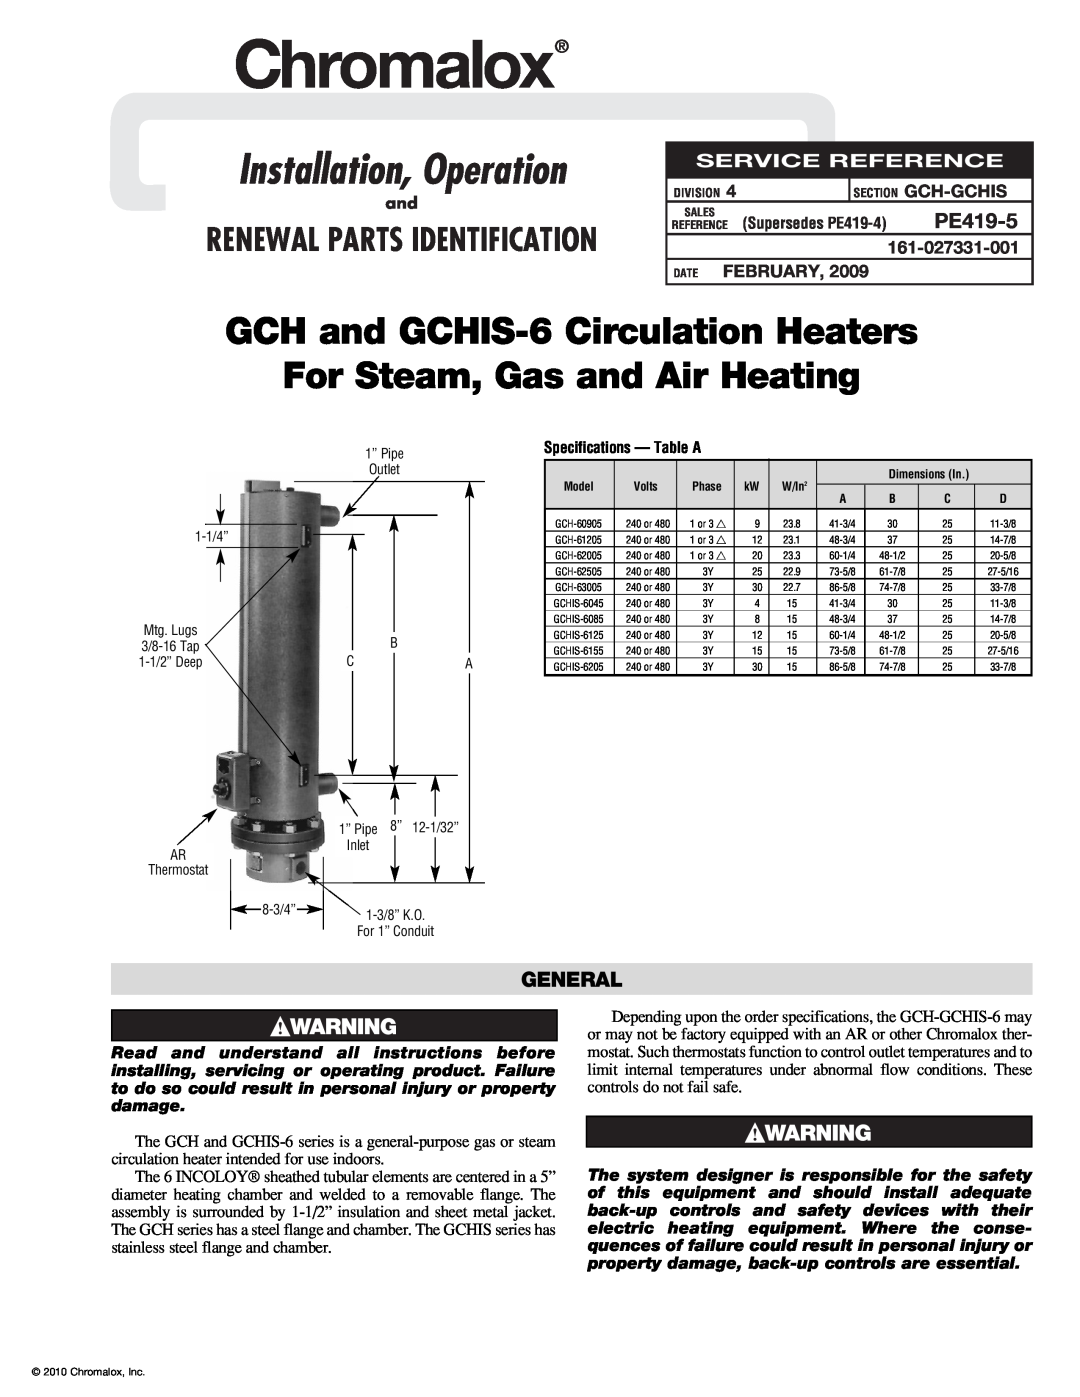 Chromalox PE419-5 specifications General, Section Gch-Gchis, Date February, Chromalox, Installation, Operation 